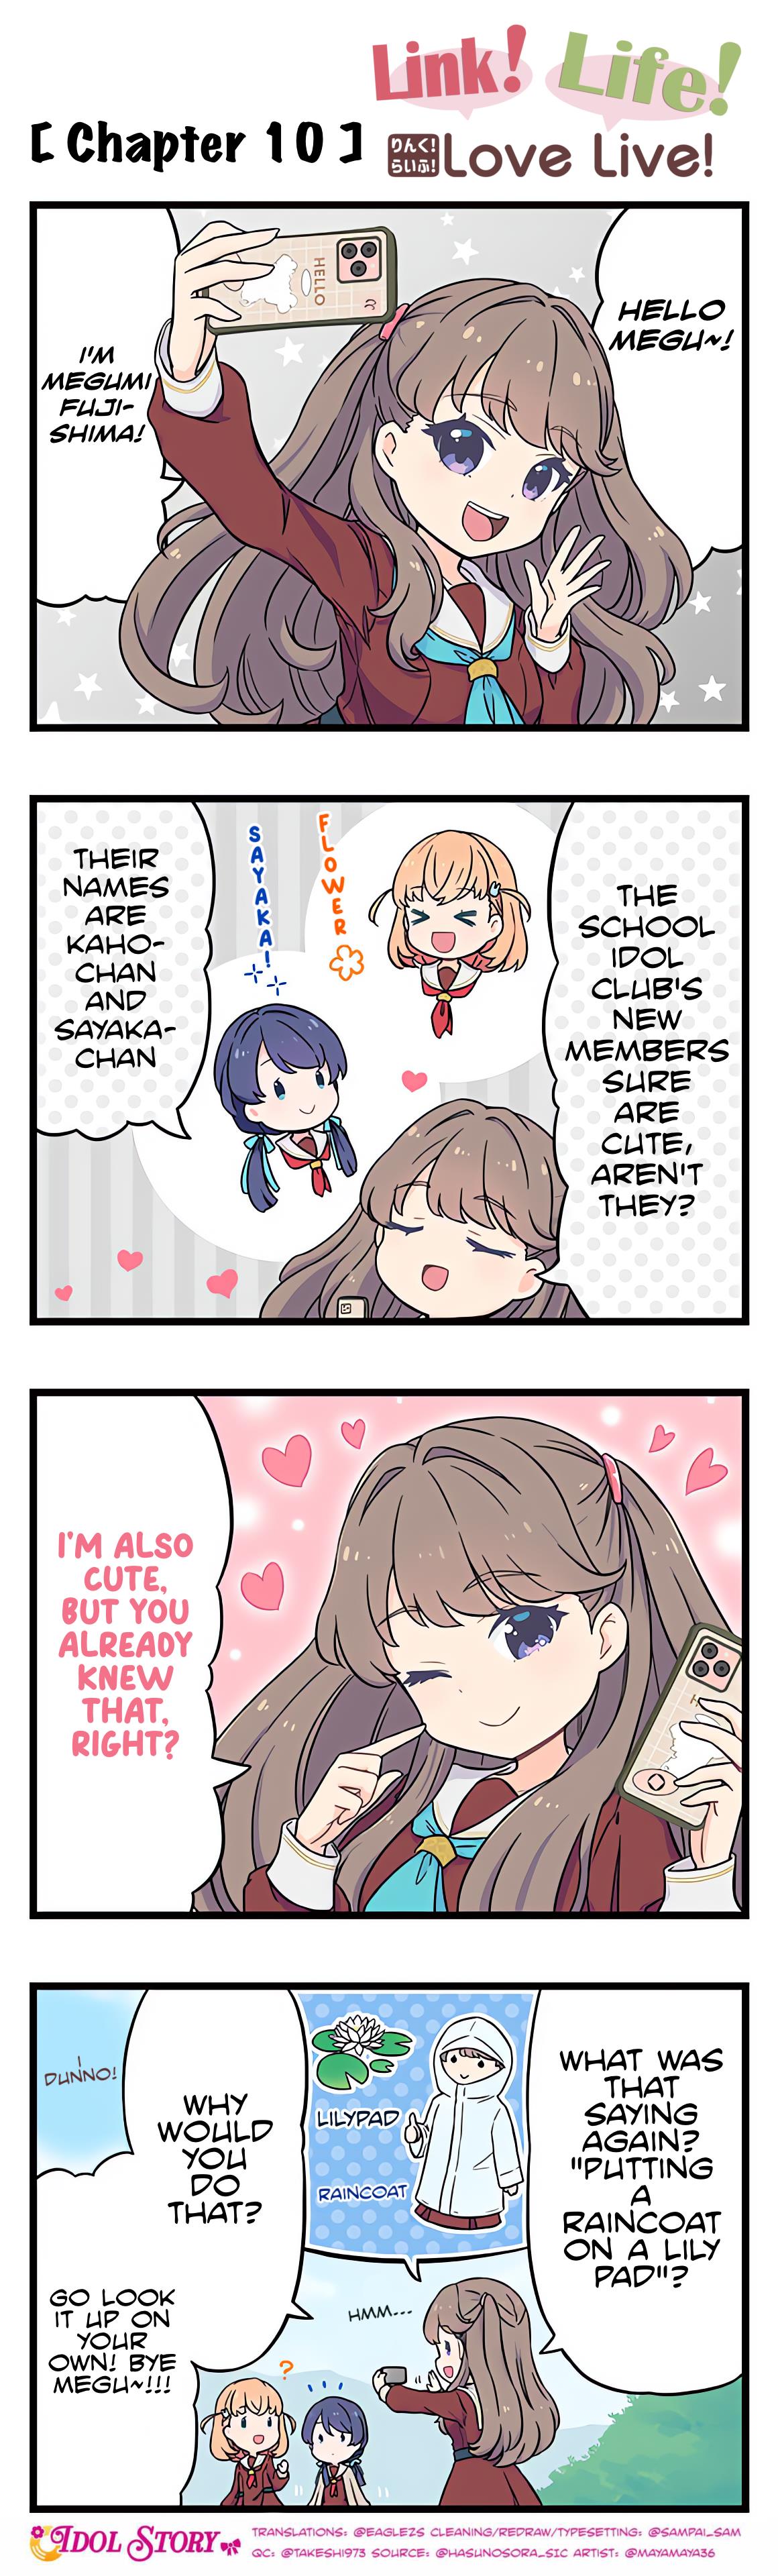 Link! Life! Love Live! Chapter 10 #1